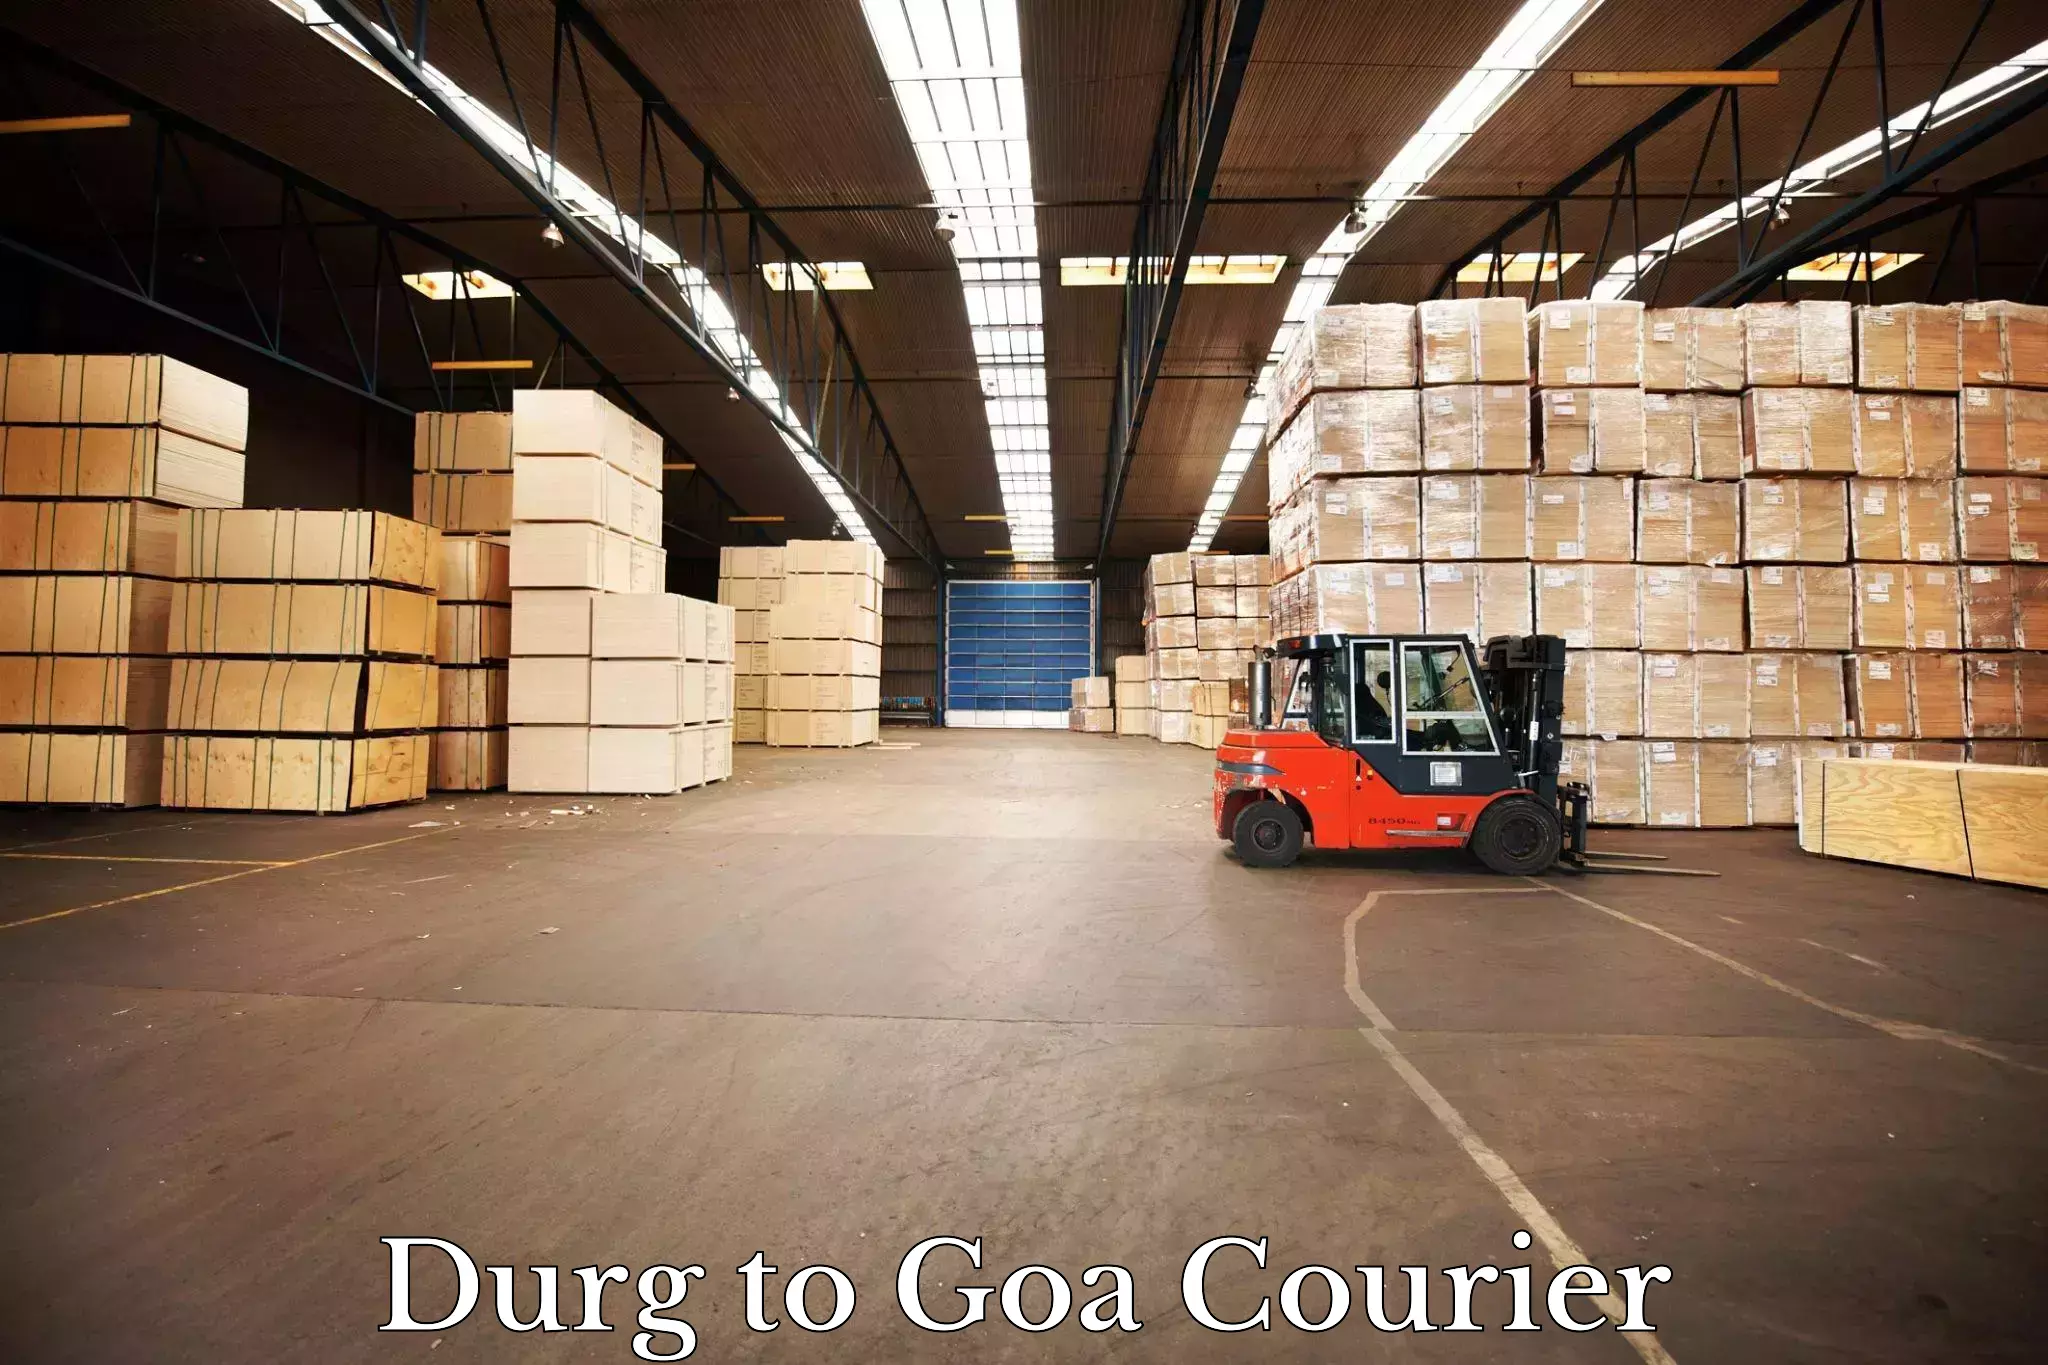 Online package tracking Durg to Mormugao Port